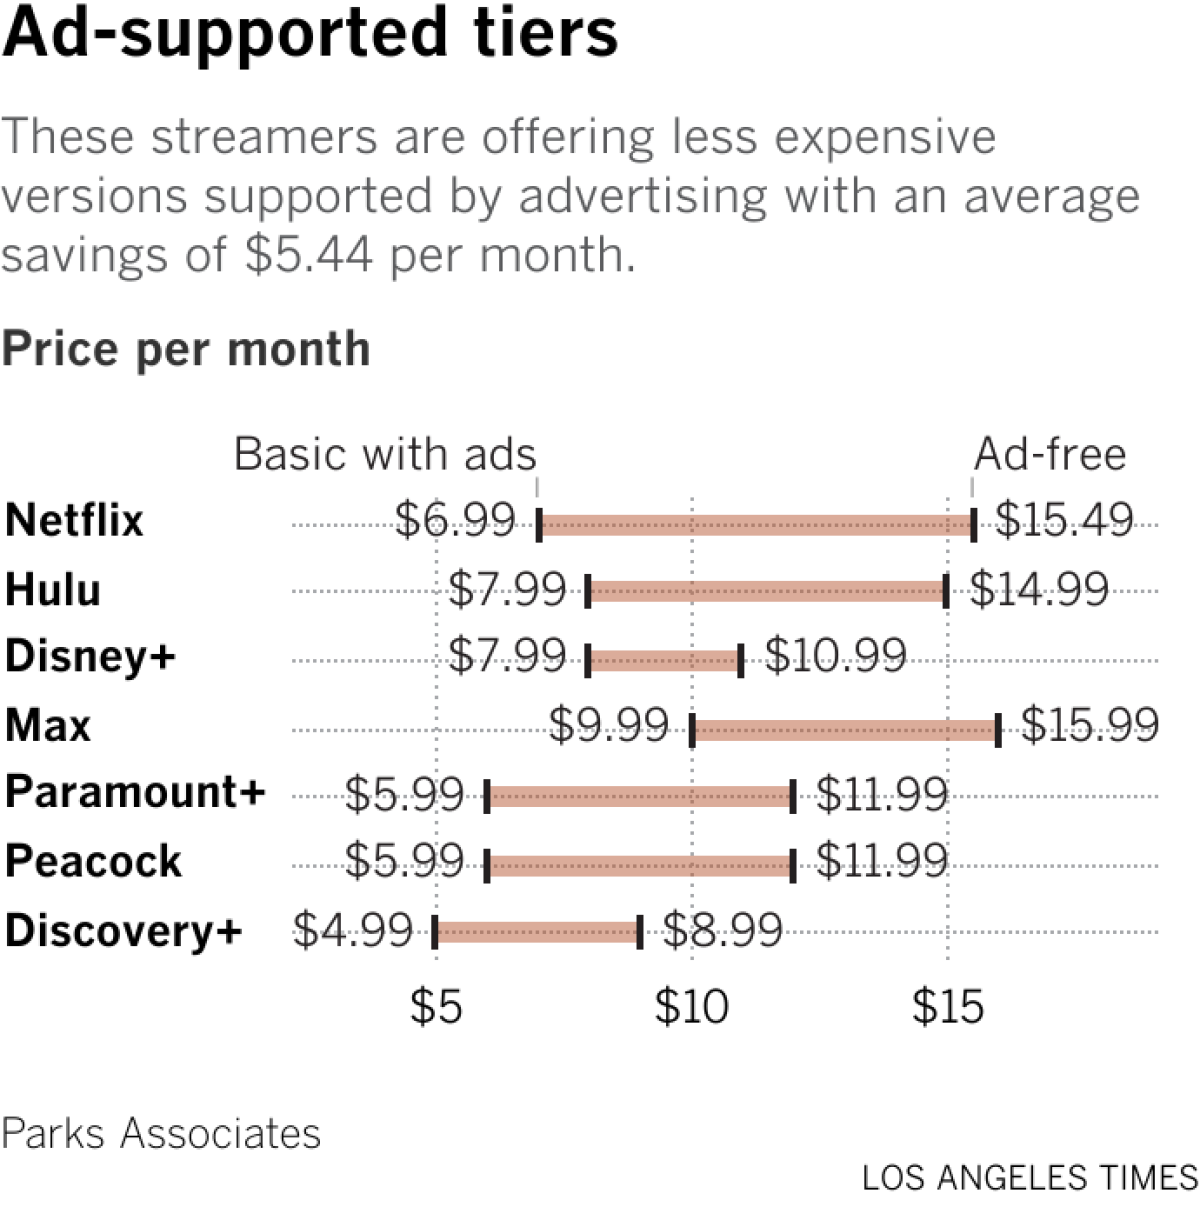 Chart comparing ad free vs ad tiers of streaming services.